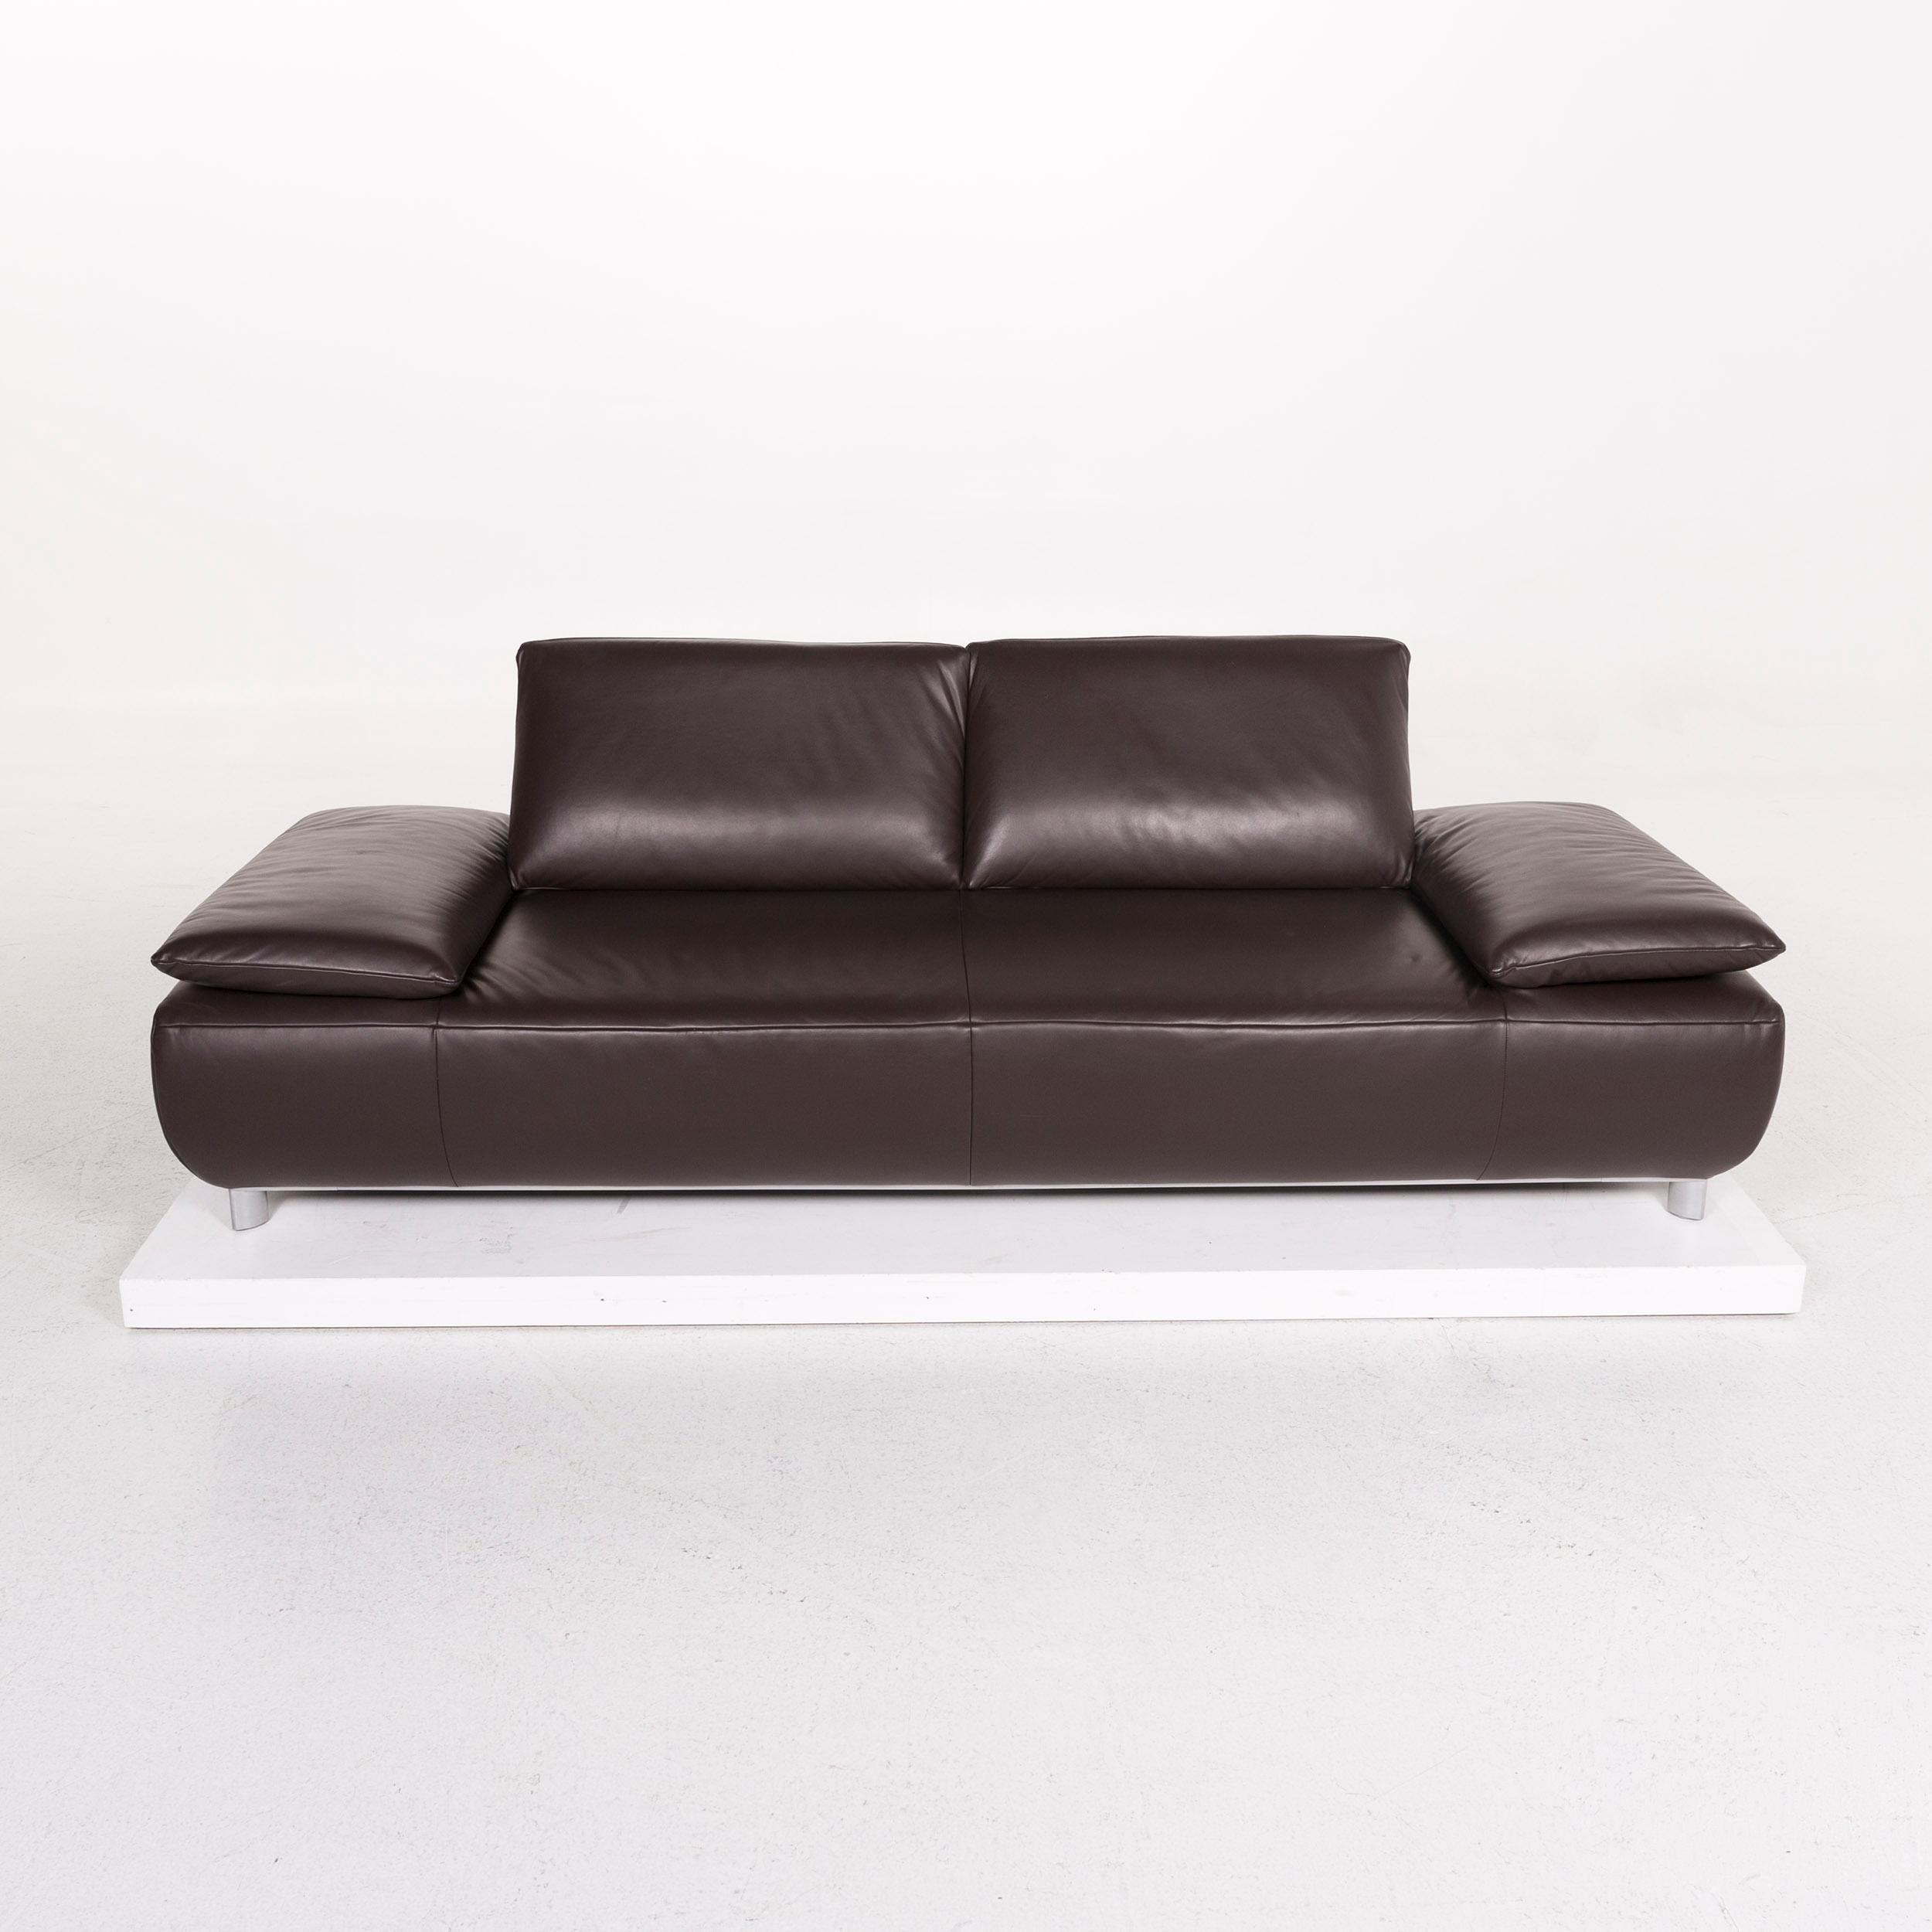 Contemporary Koinor Volare Leather Sofa Brown Dark Brown Two-Seat Function Couch